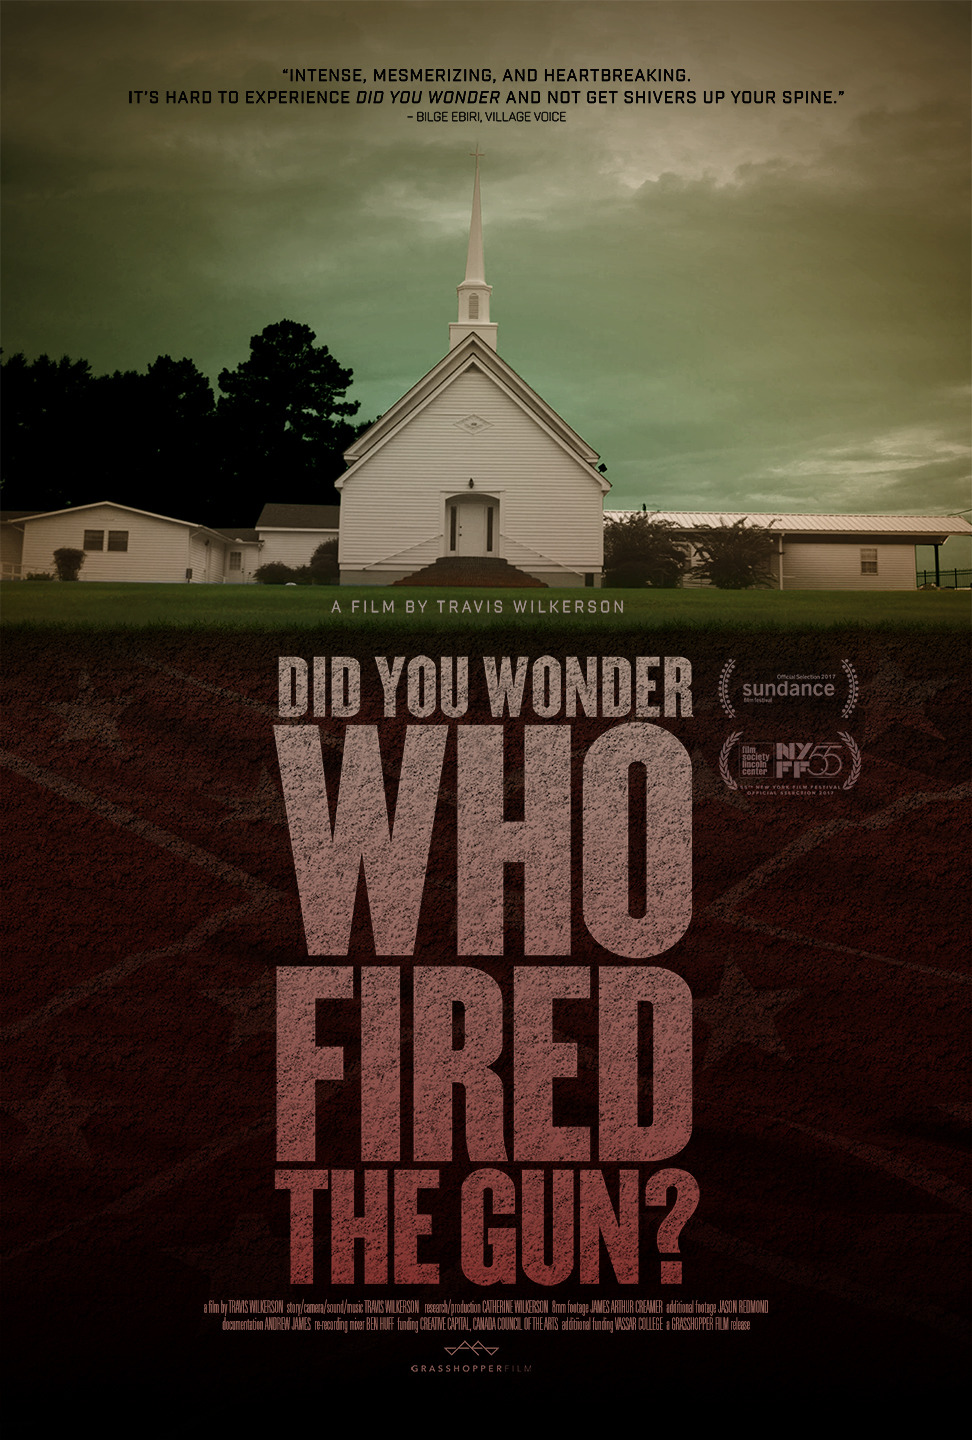 Extra Large Movie Poster Image for Did You Wonder Who Fired the Gun? 